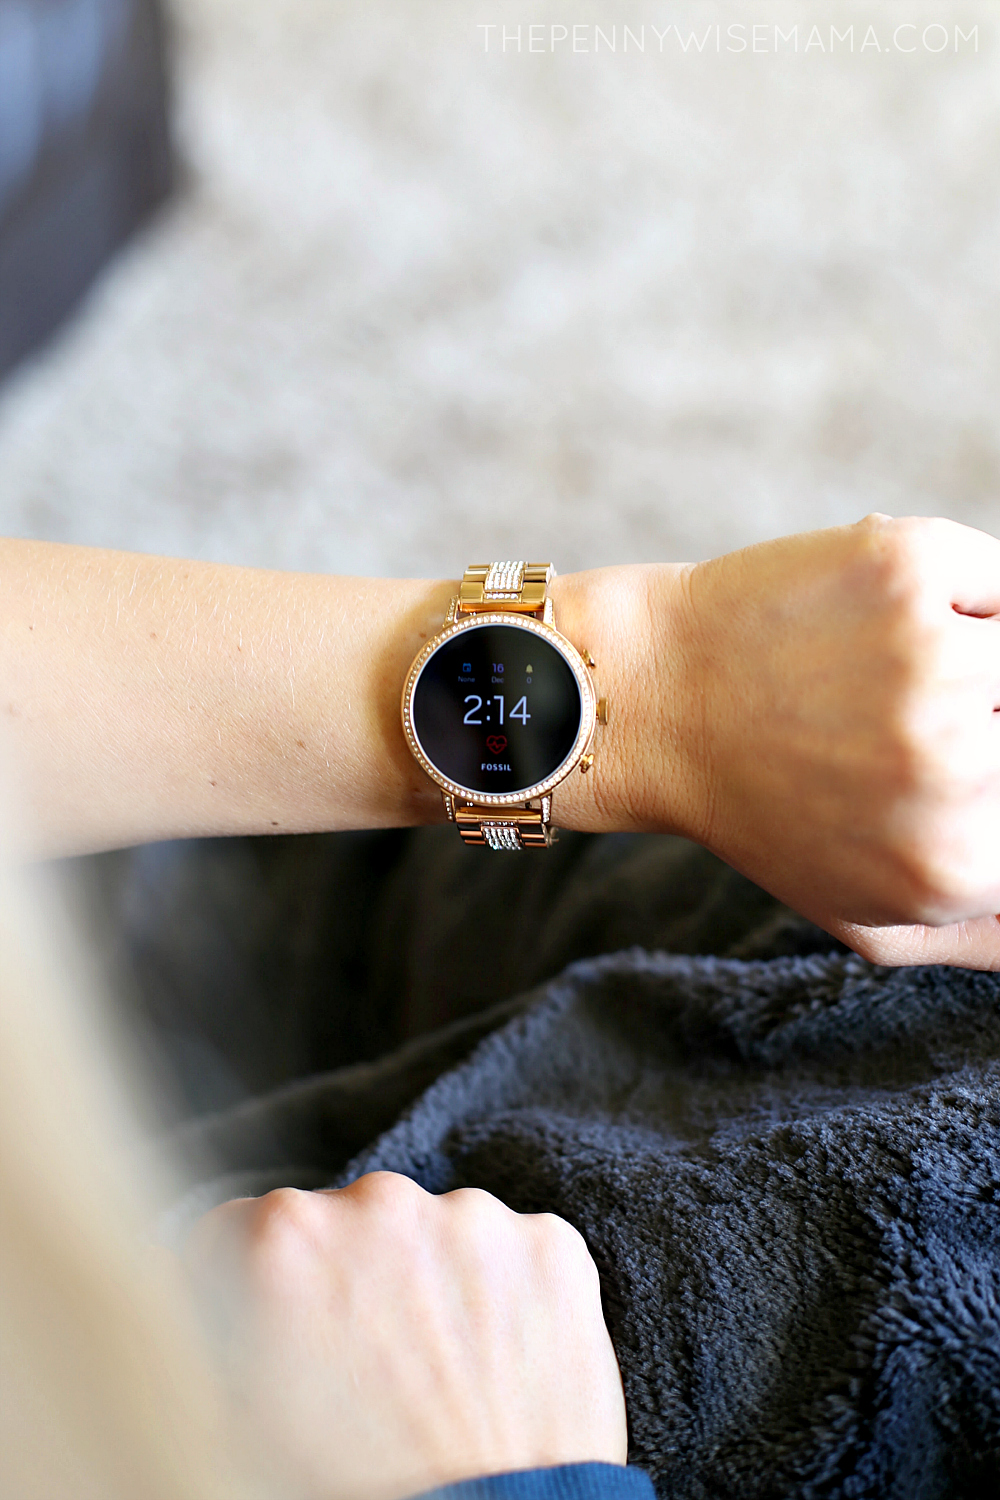 Fossil Gen Venture HR - A Functional & Stylish Smartwatch - The PennyWiseMama